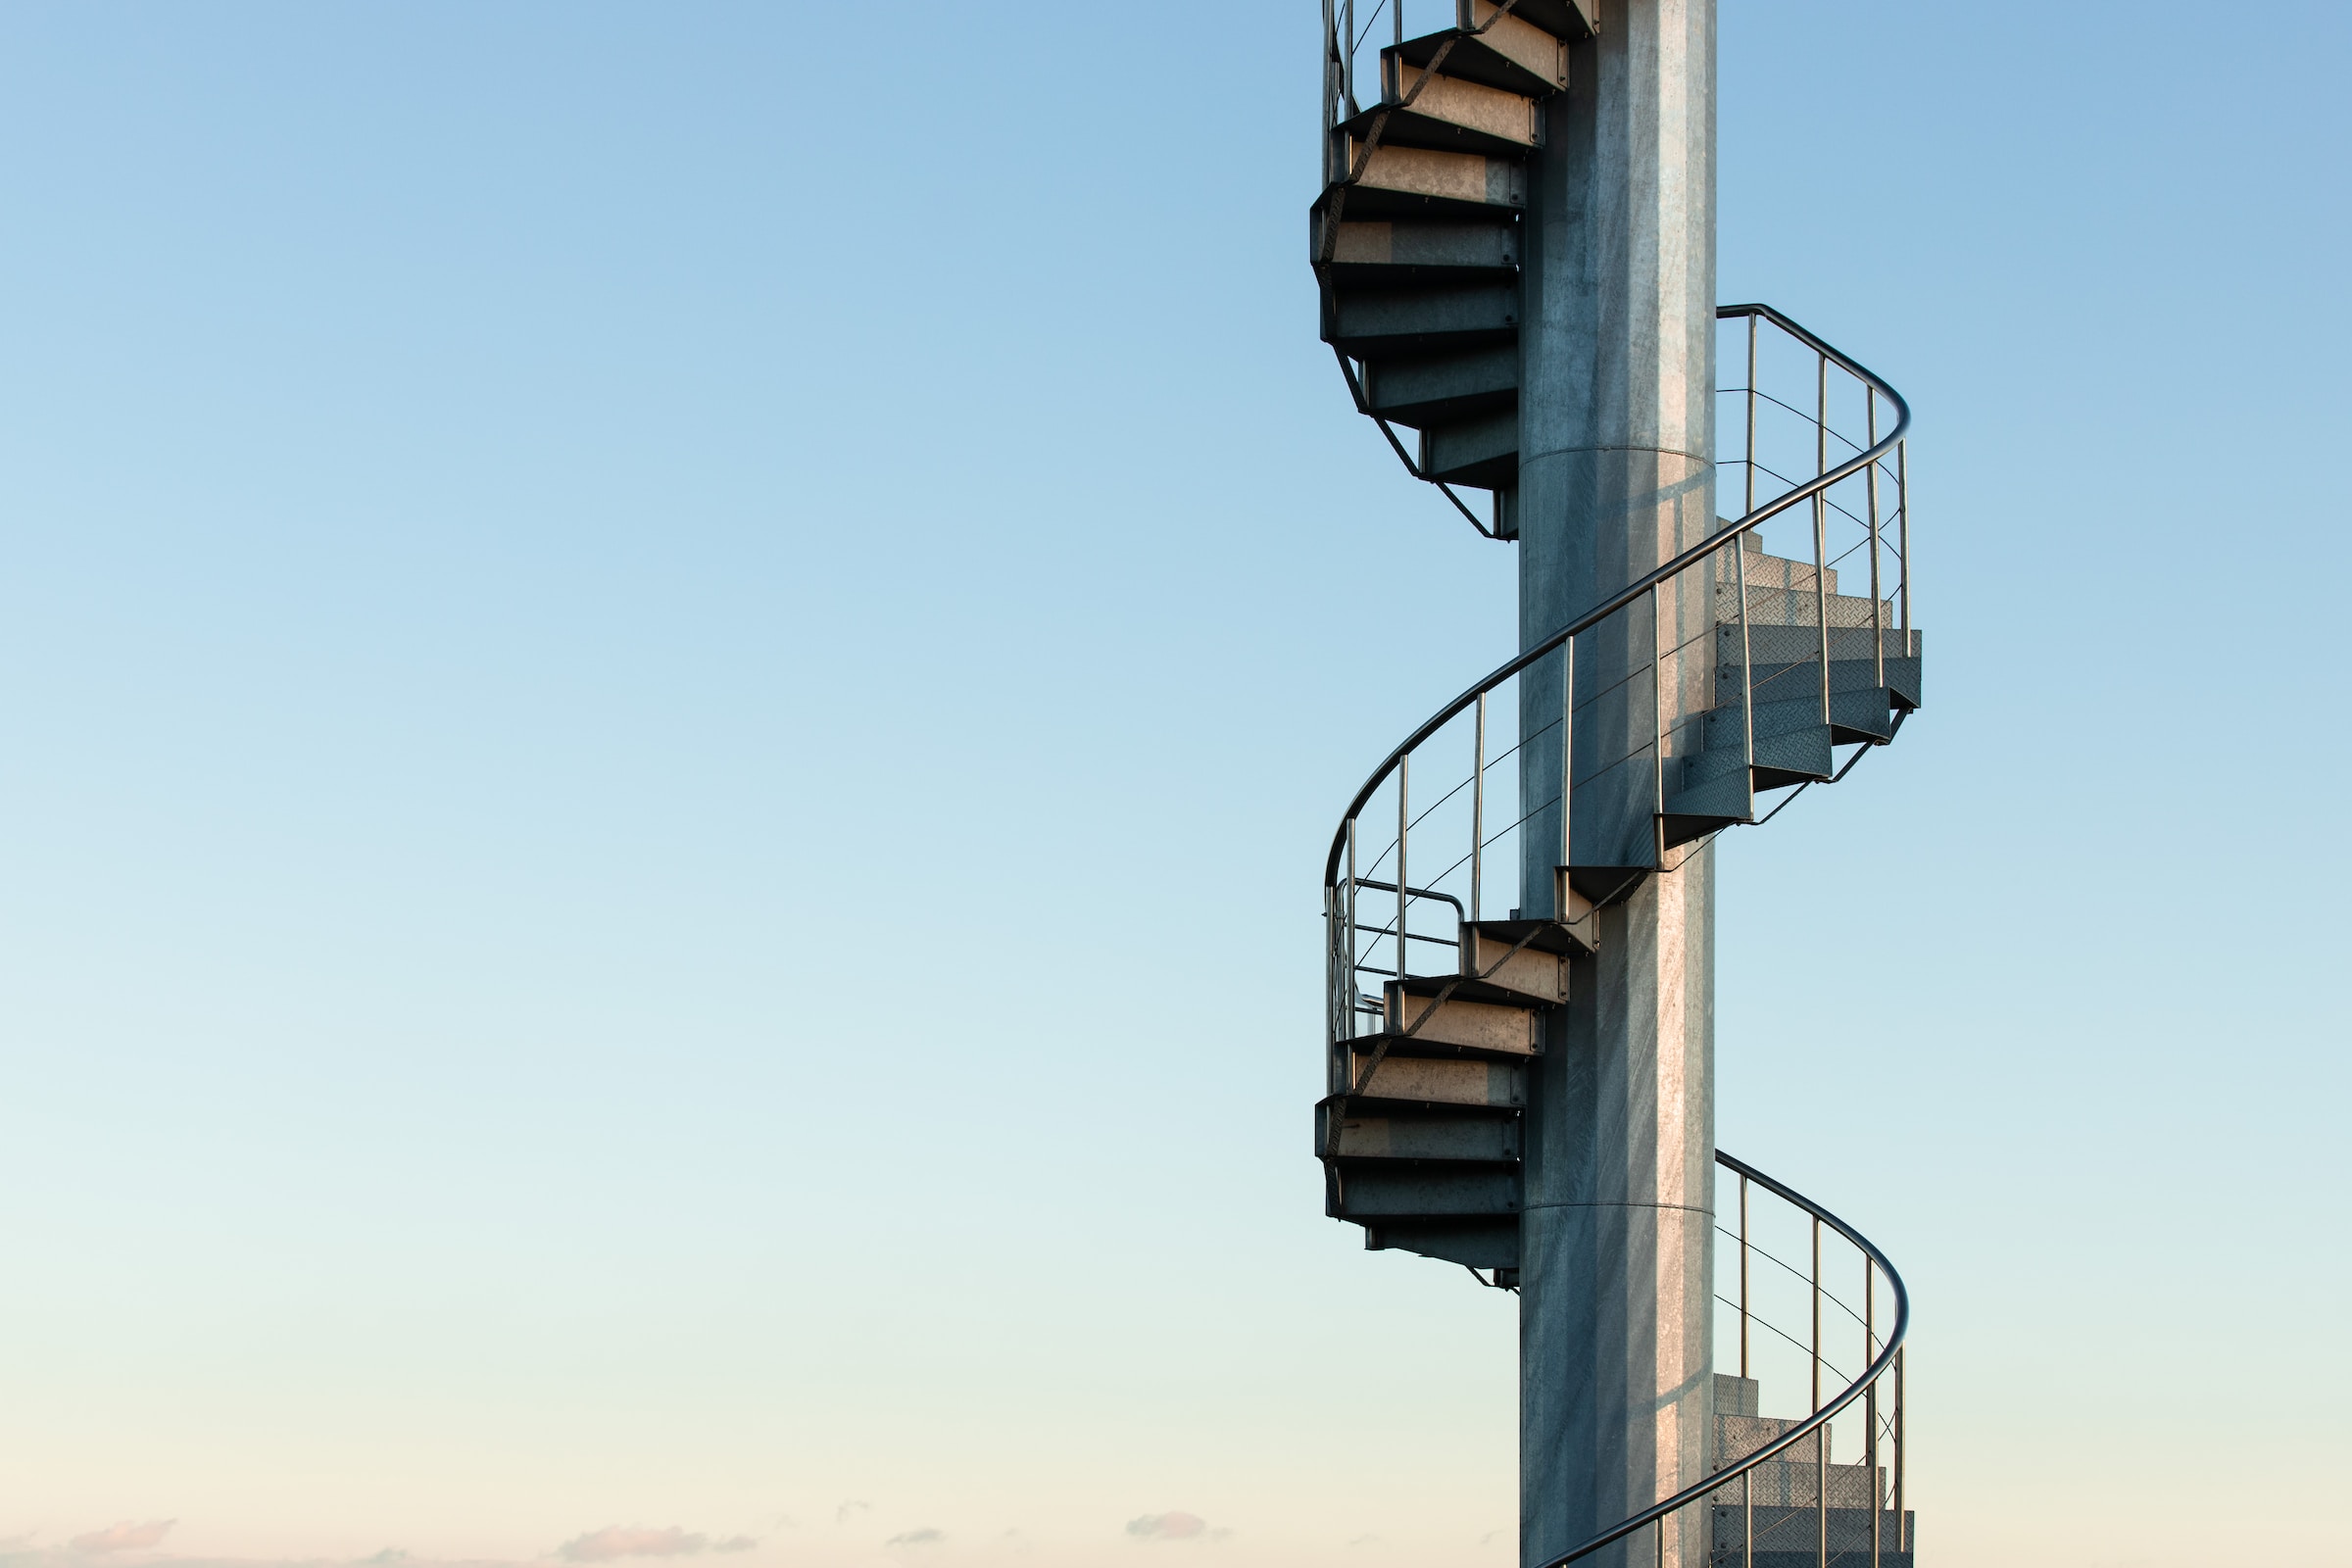 Image of a staircase winding up into the sky